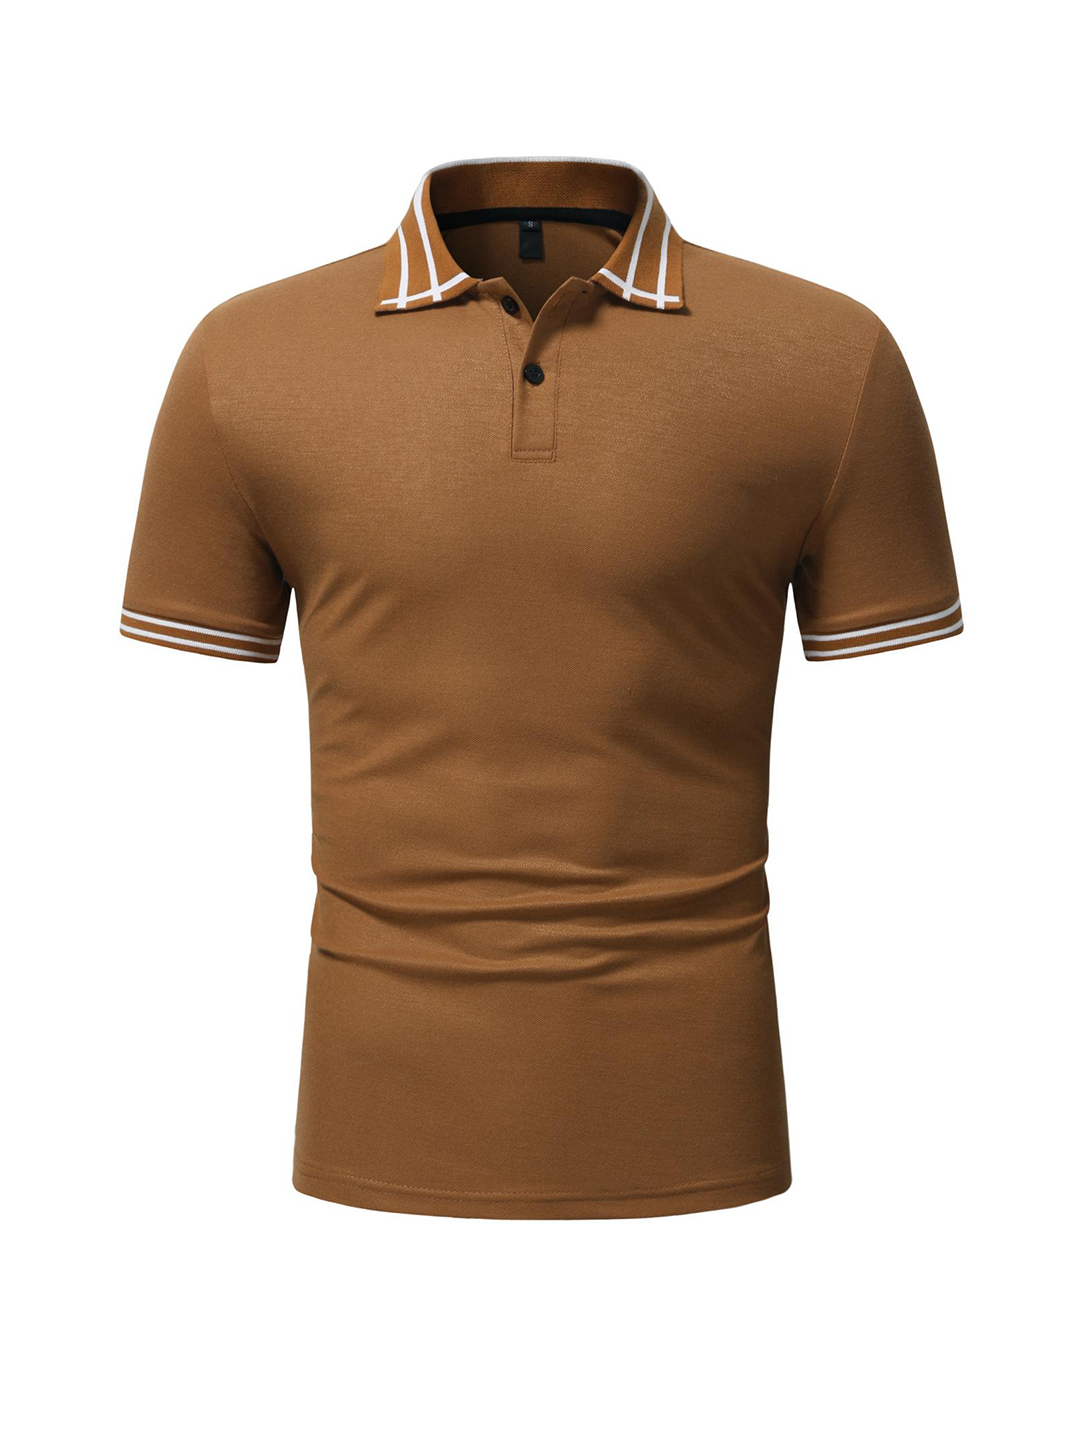 Kenney Simple Lapel Short-sleeved Polo T-shirt-poisonstreetwear.com